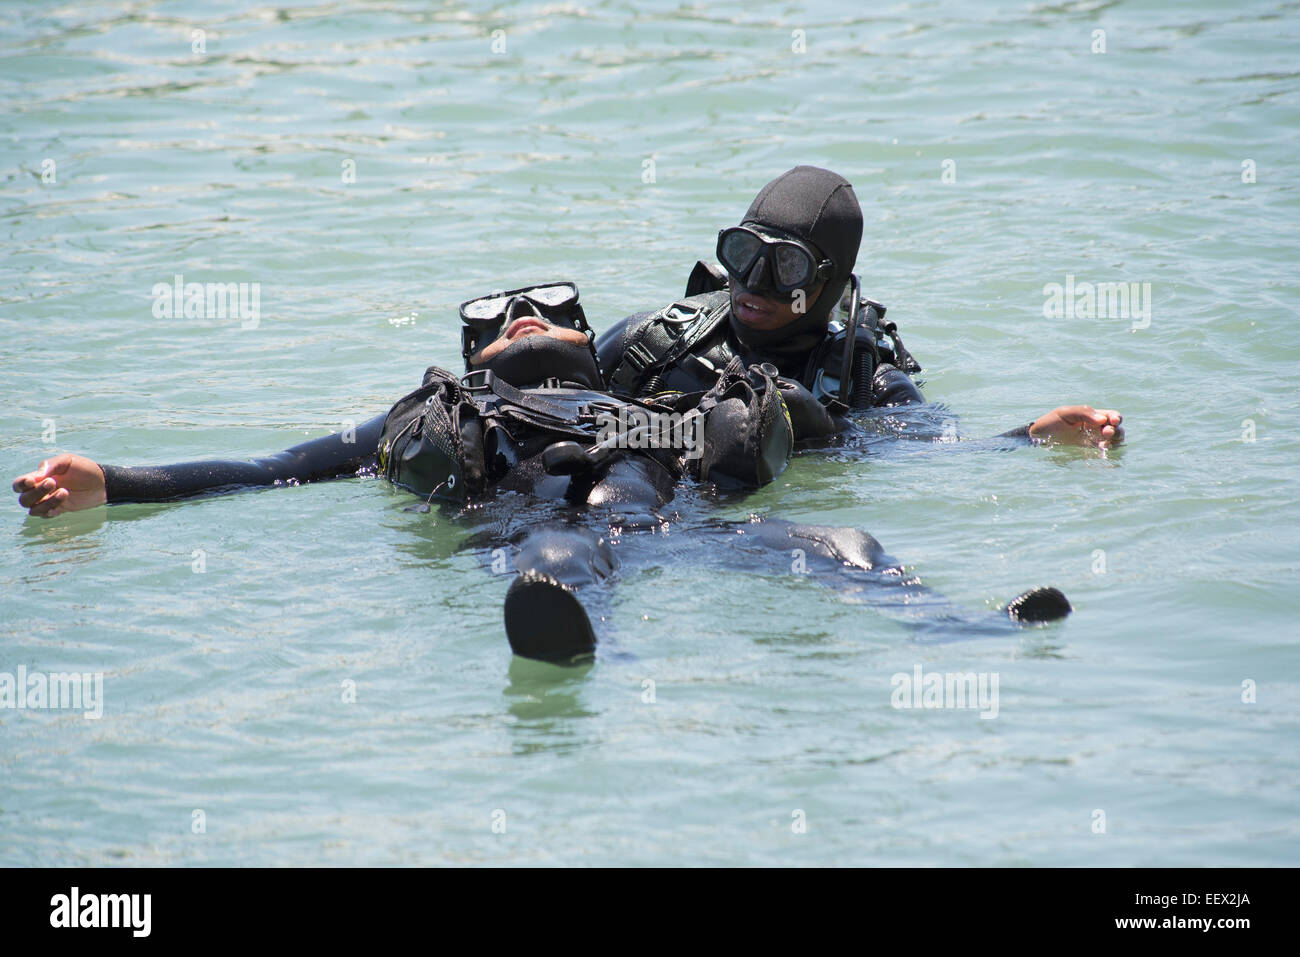 Commercial deep sea diver training simulating a rescue situation One diver rescues another Stock Photo